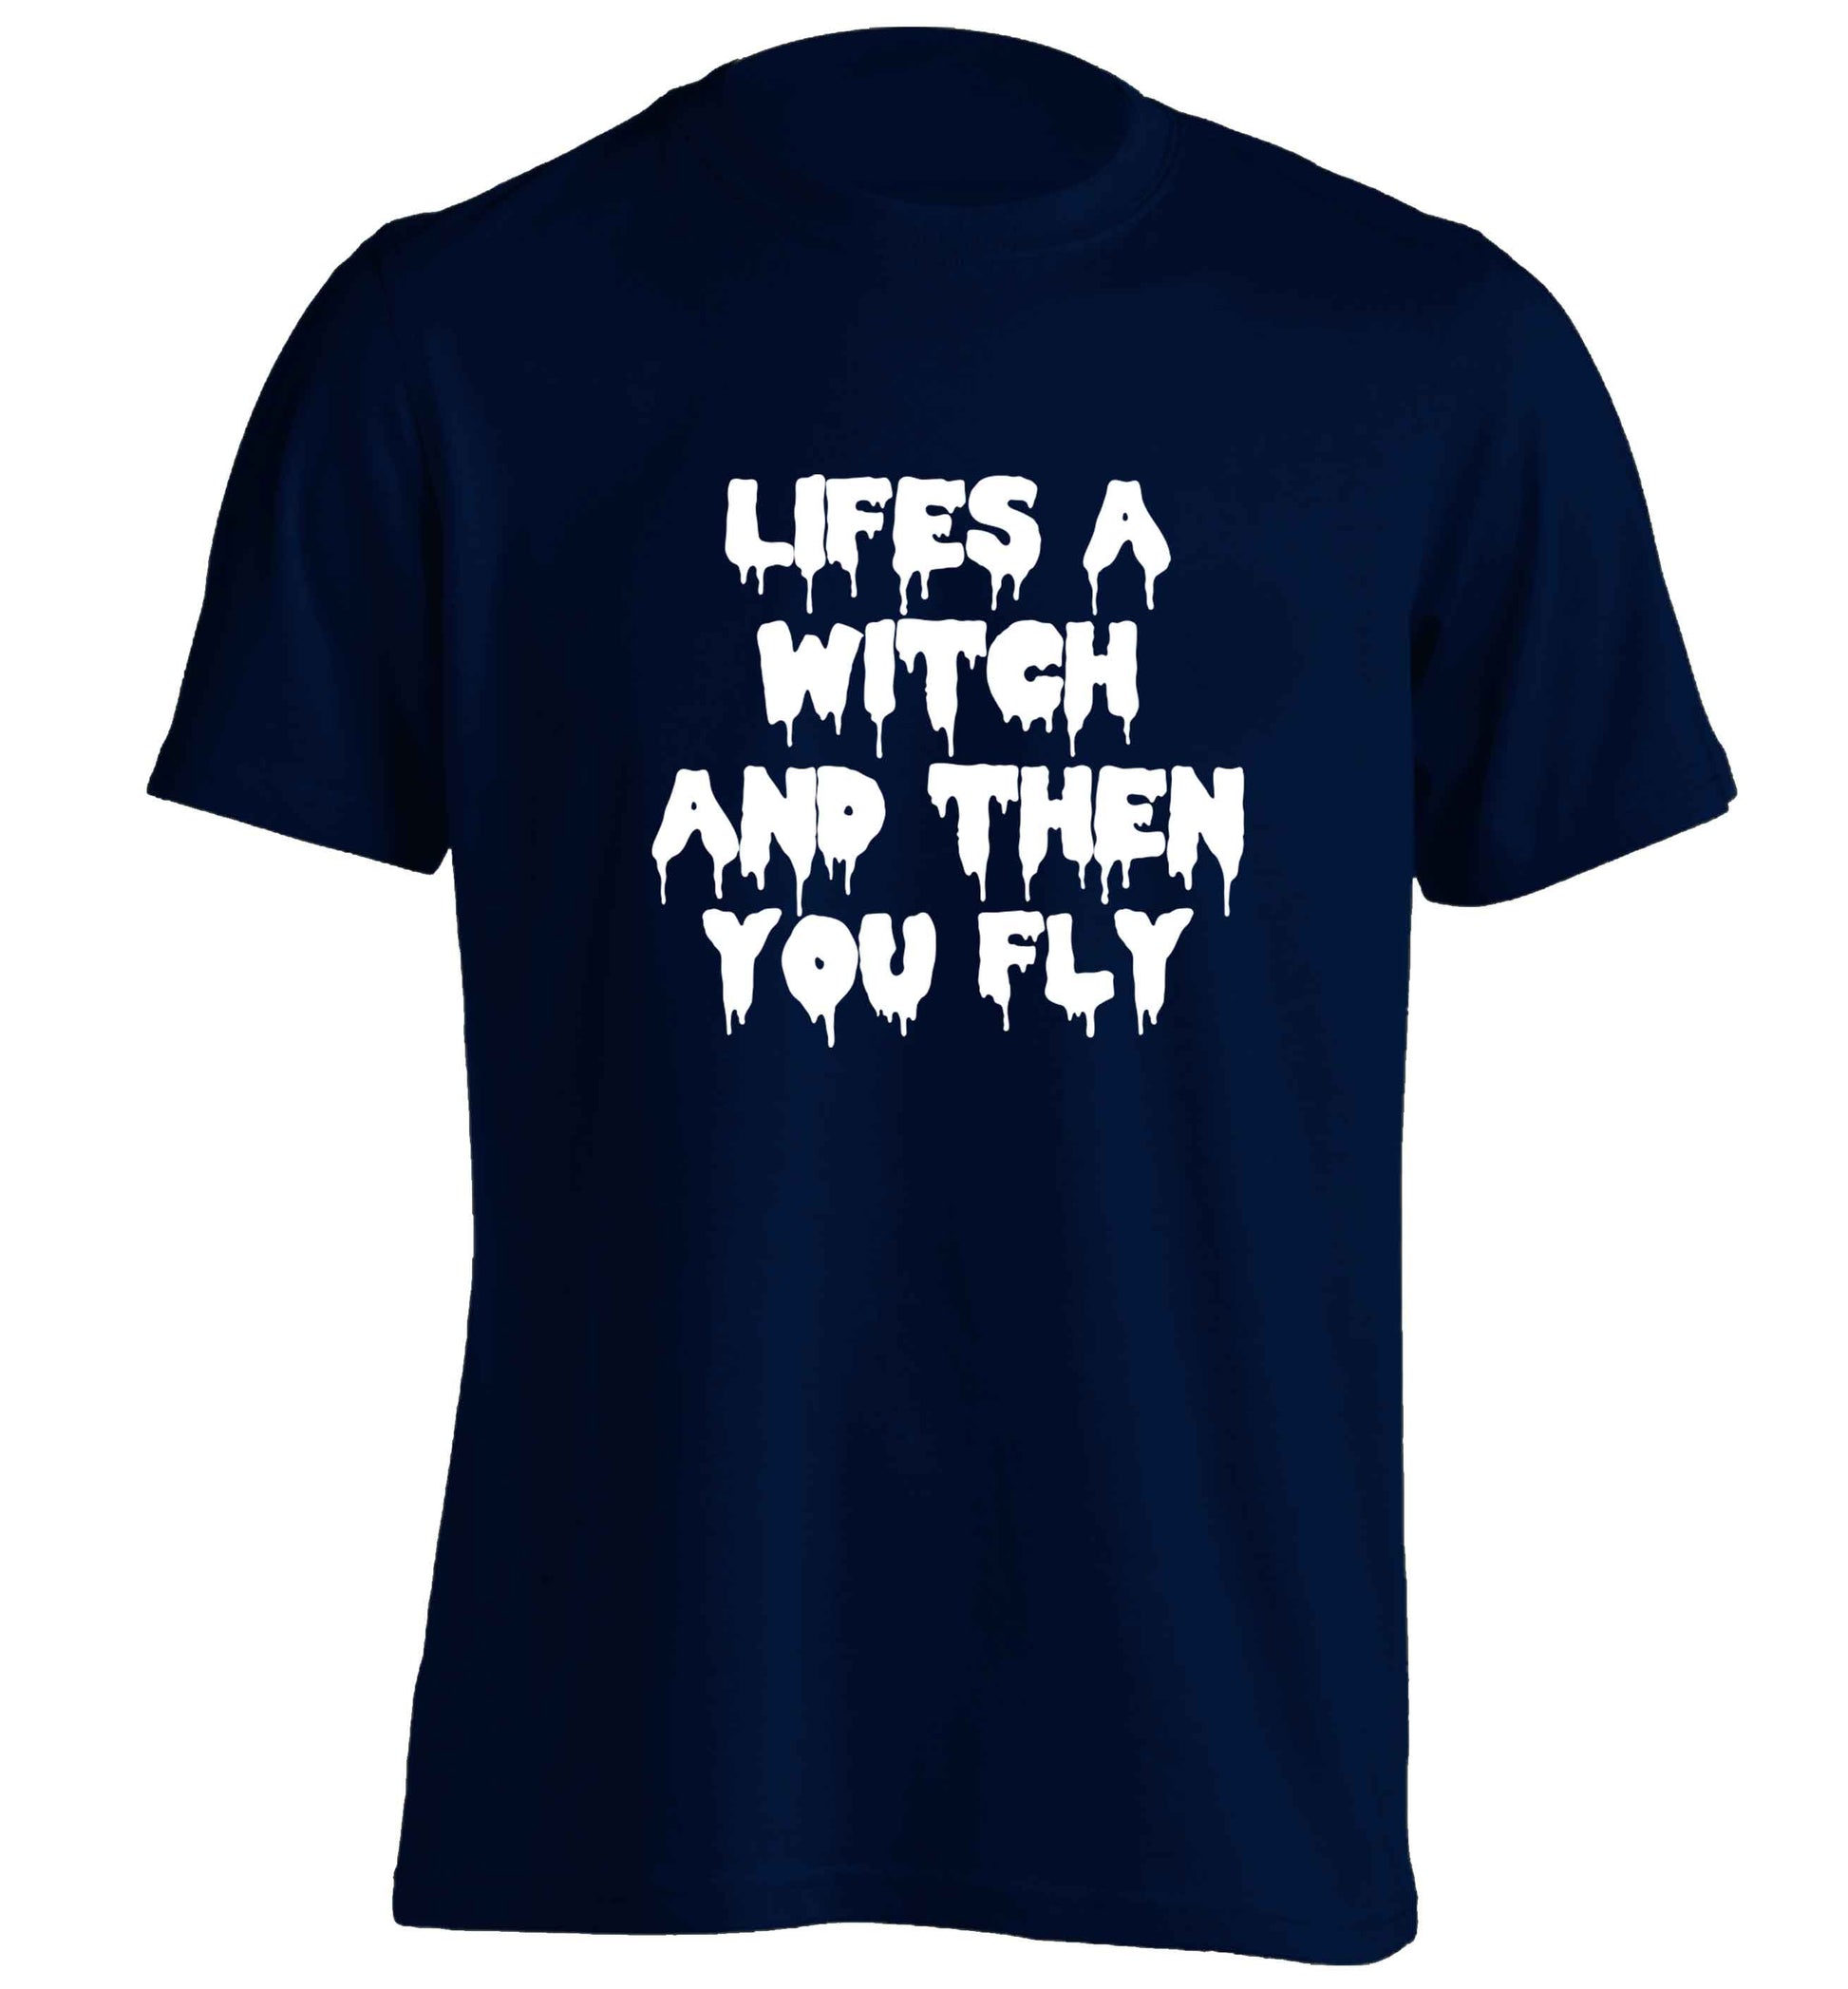 Life's a witch and then you fly adults unisex navy Tshirt 2XL